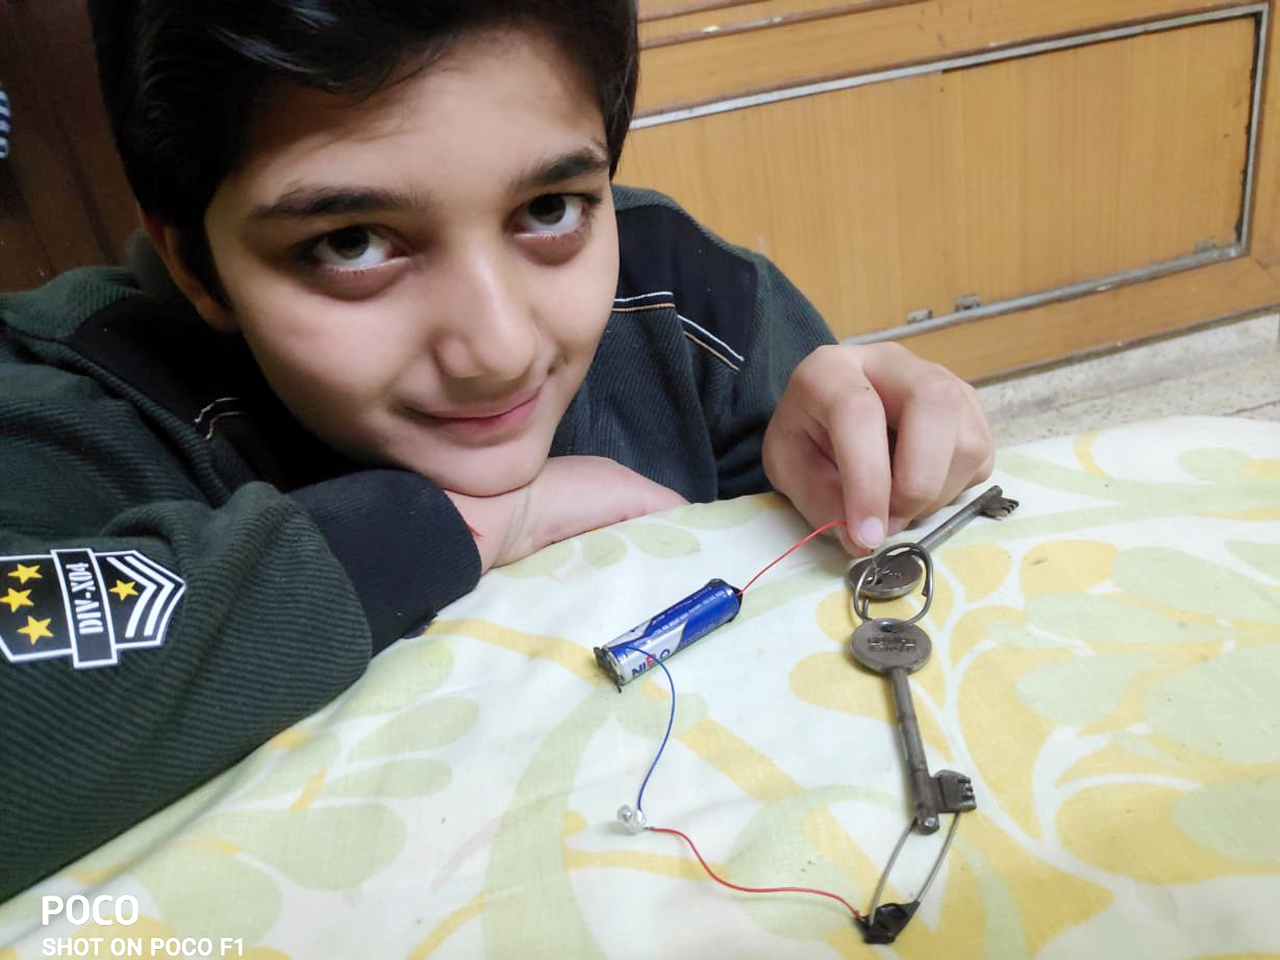 STUDENTS TAKE PART IN ELECTRIC CIRCUIT ACTIVITY 2020